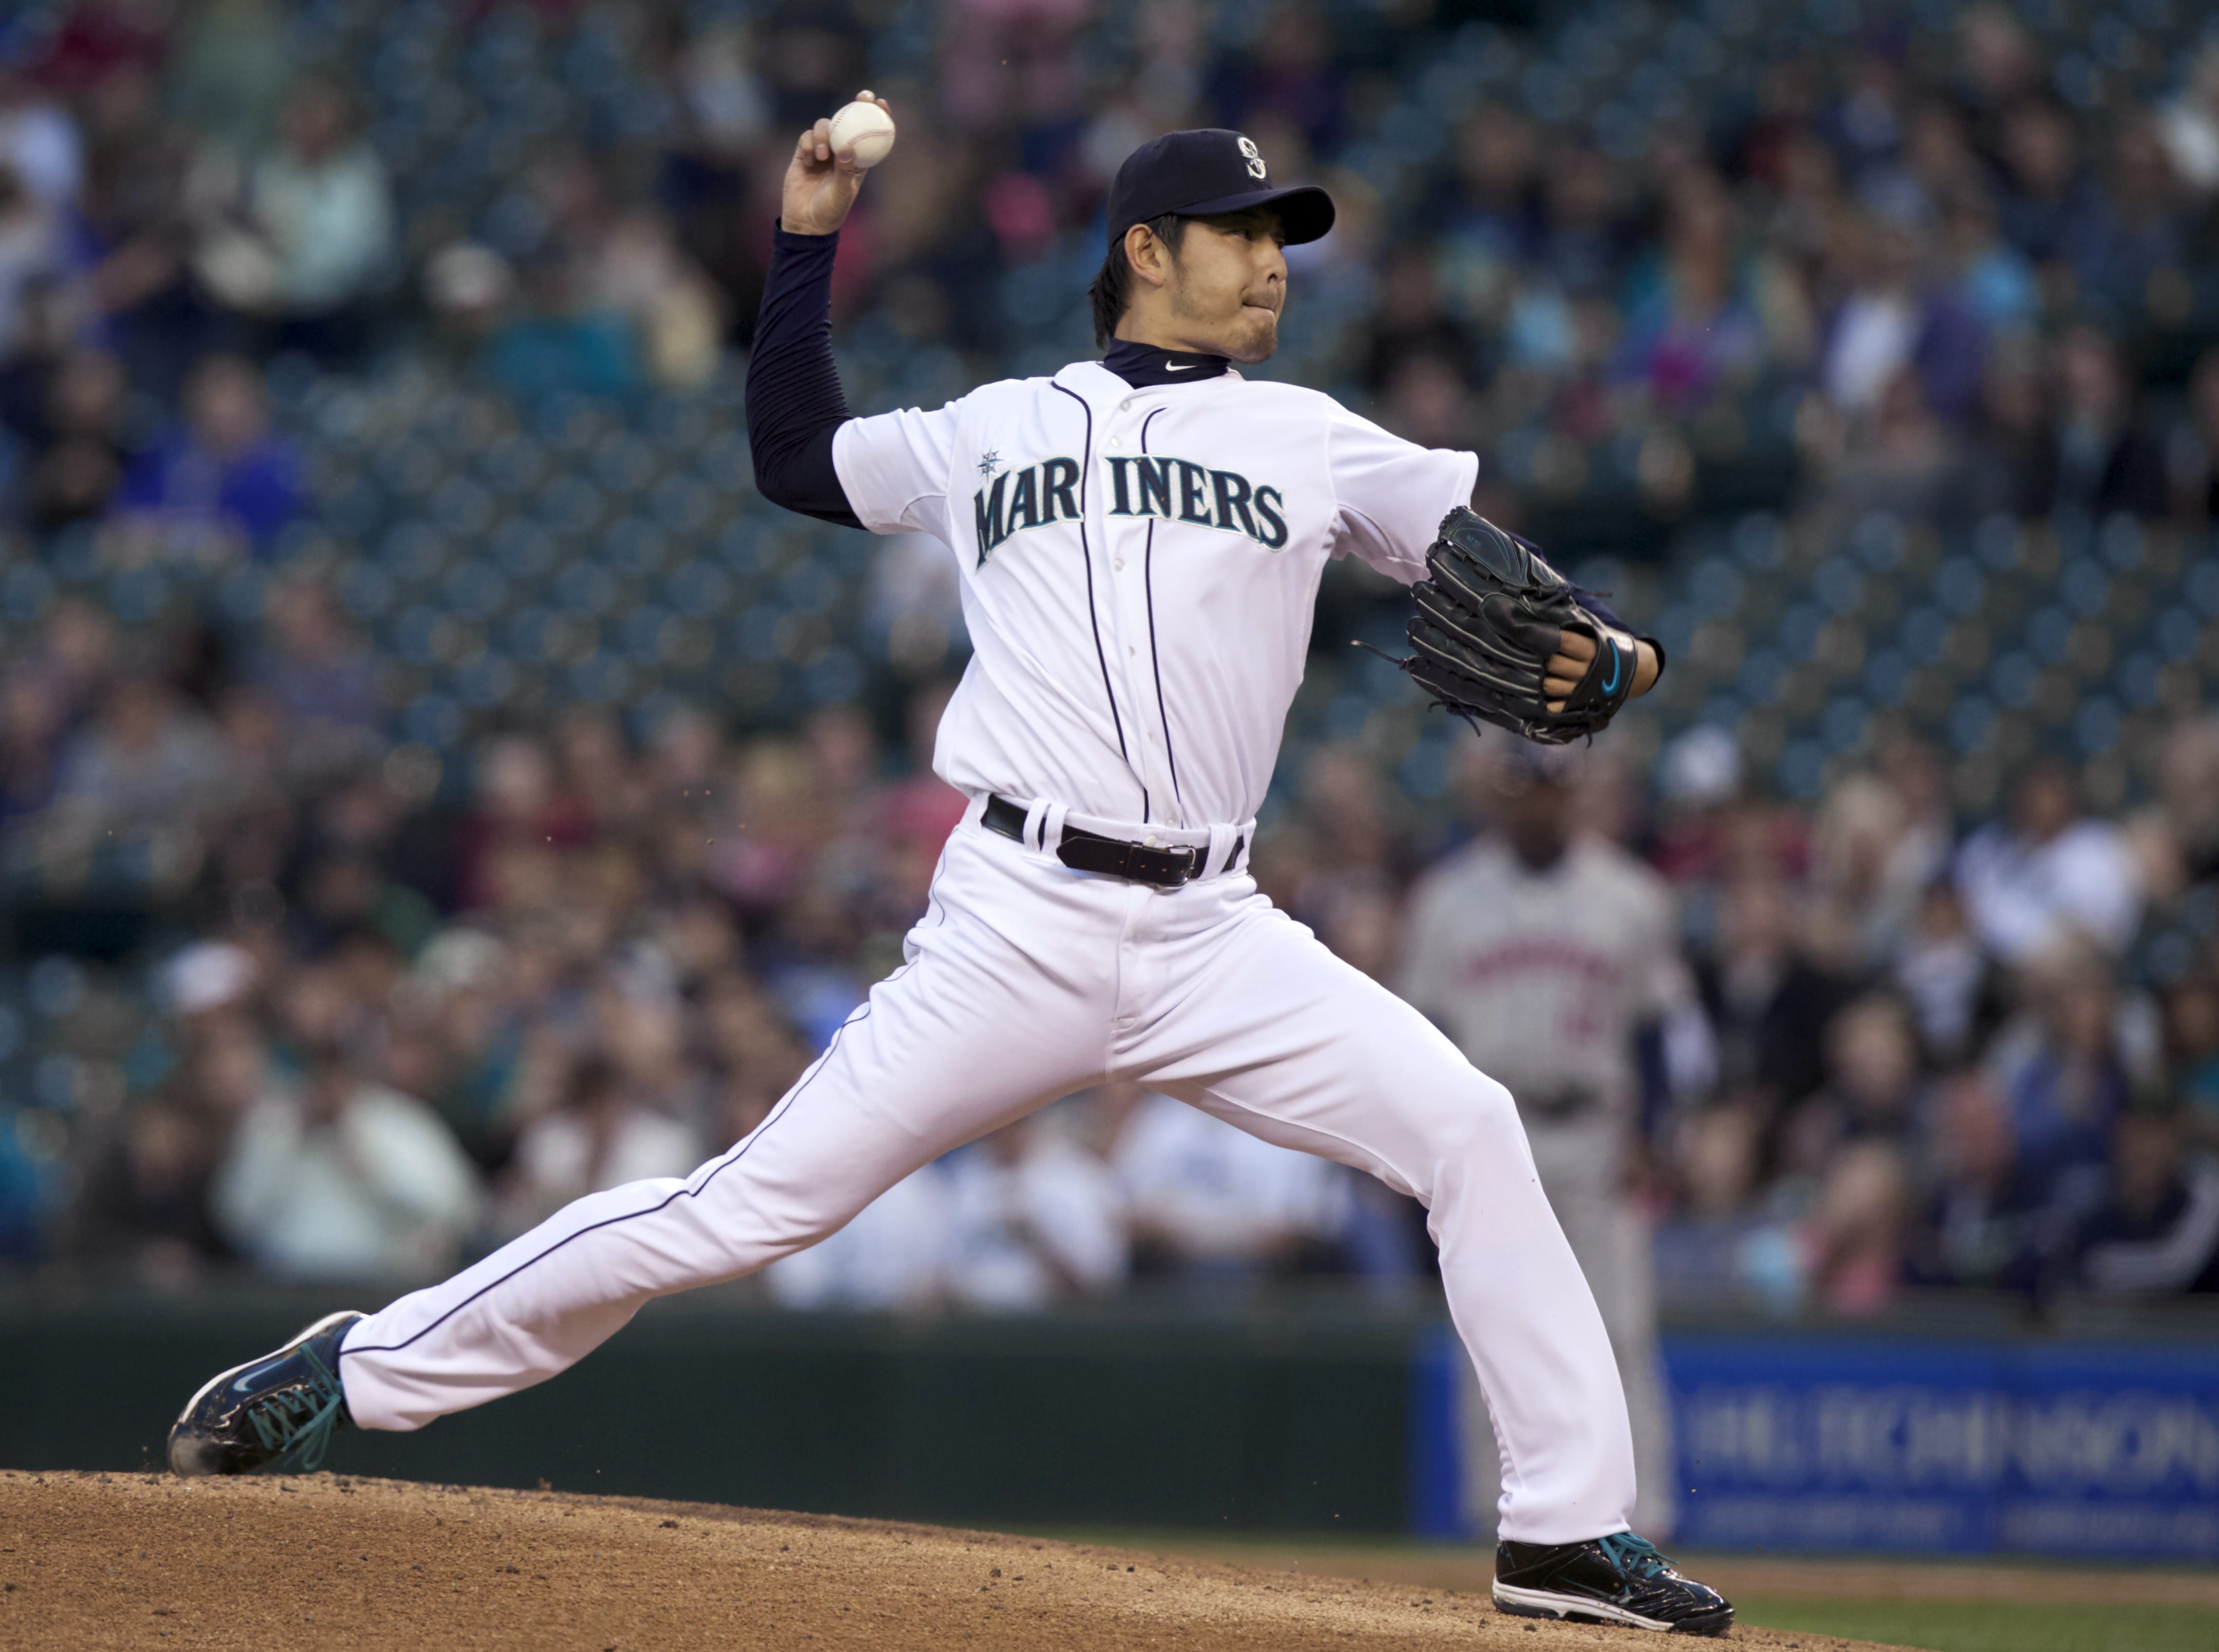 Seattle Mariners starter Hisashi Iwakuma delivers a pitch during the first inning of a baseball game against the Houston Astros, Wednesday, Sept. 10, 2014, in Seattle.